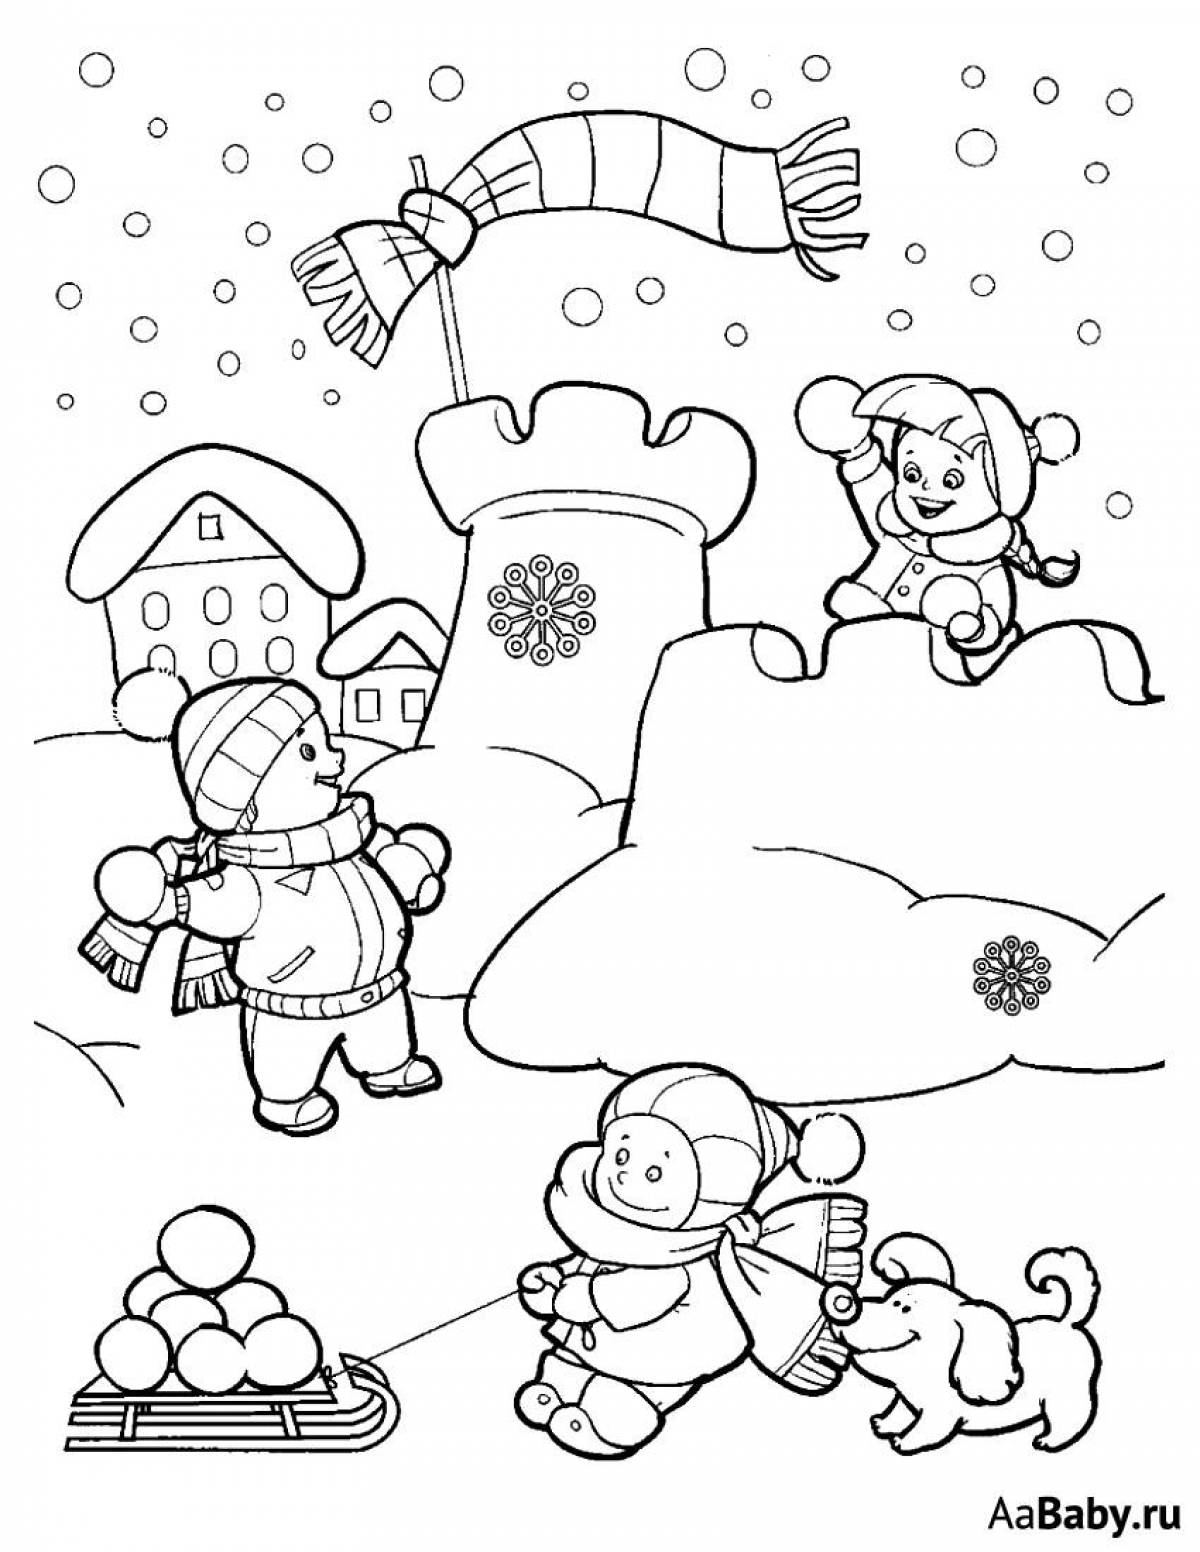 Glowing winter coloring book for children 5-6 years old